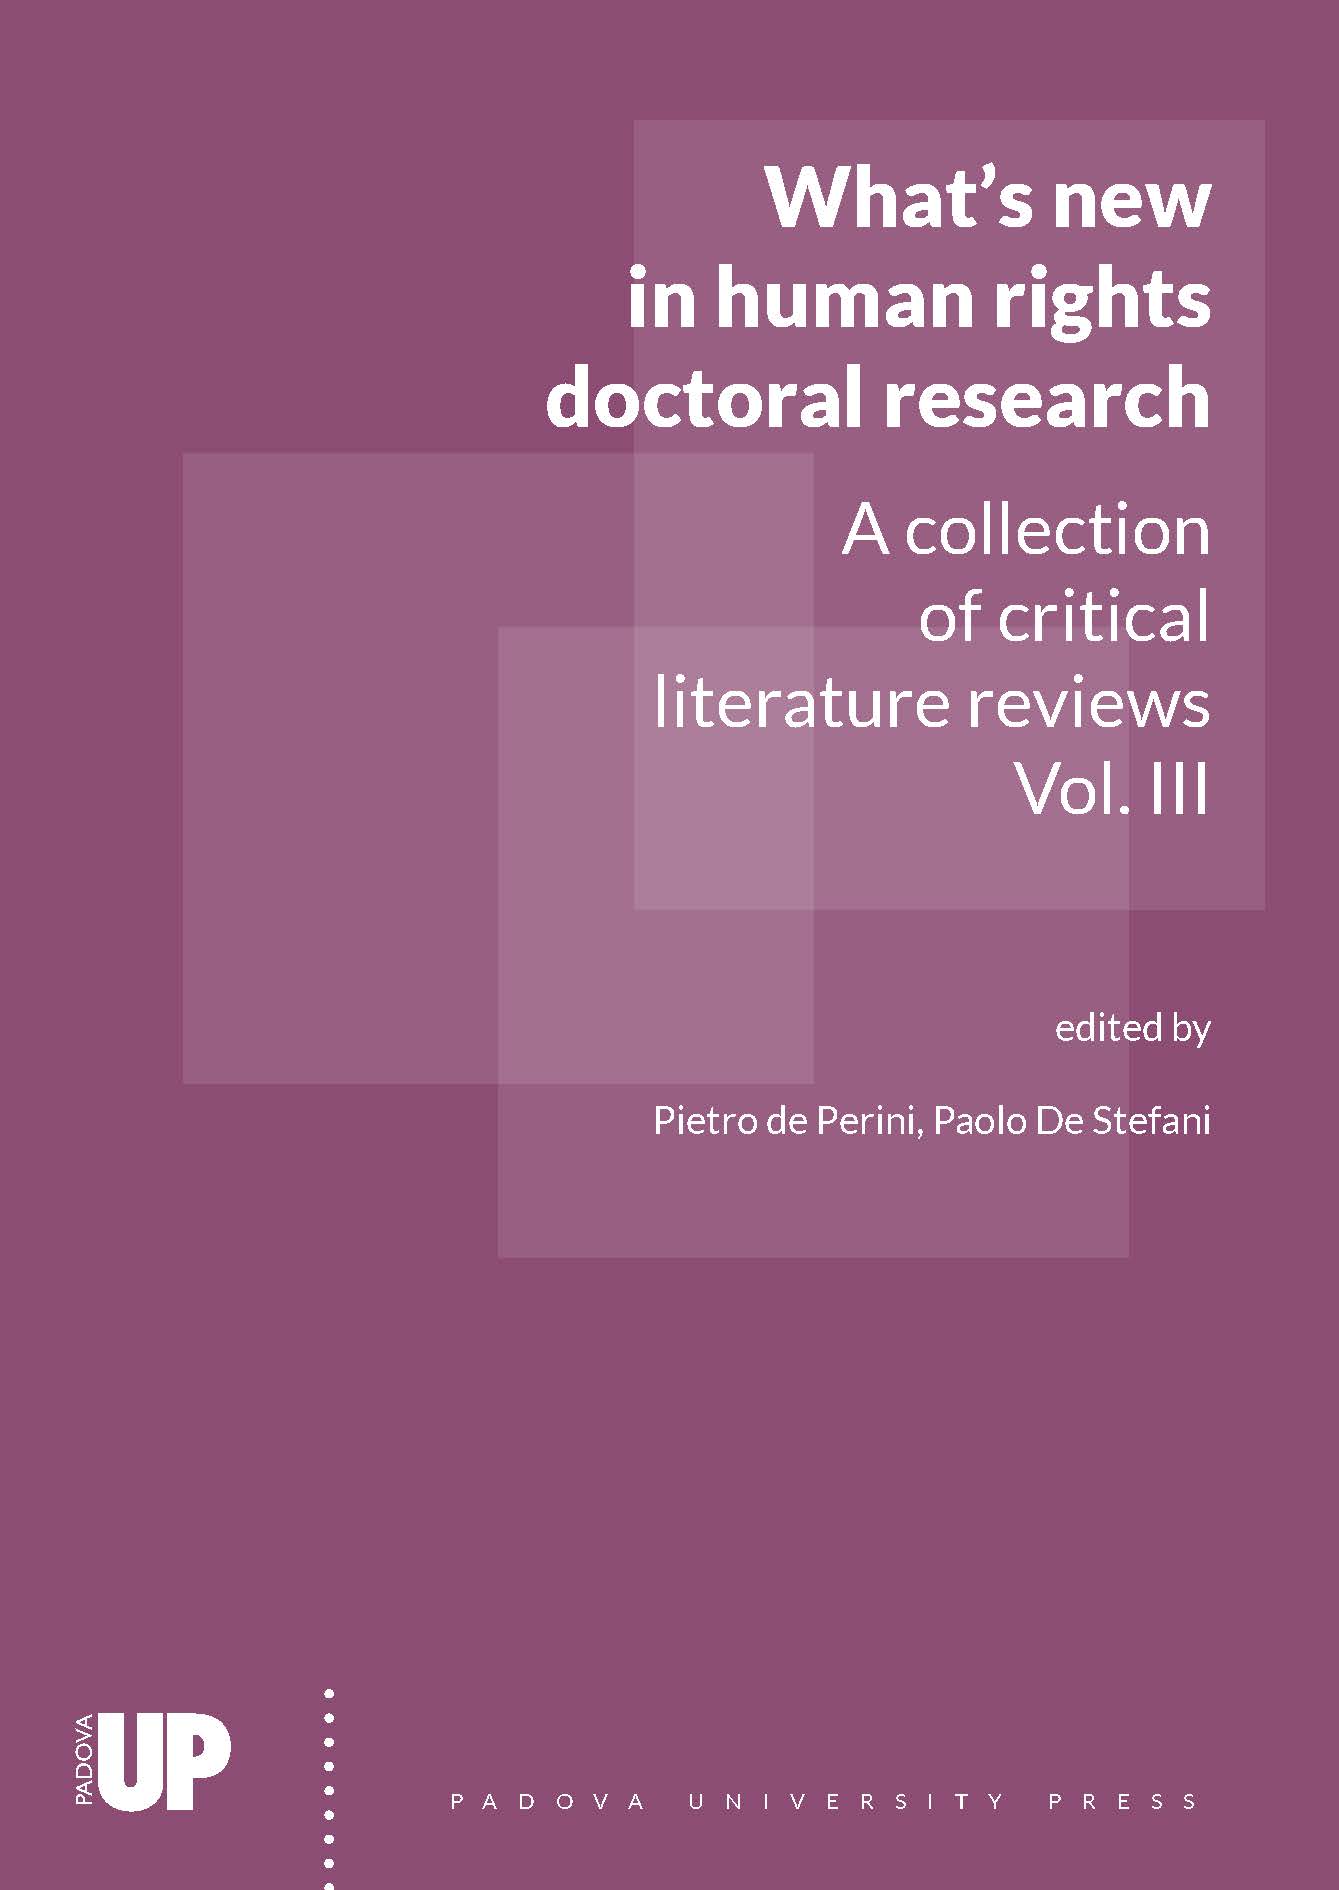 Whats new in Human Rights Doctoral Research, vol. III cover
